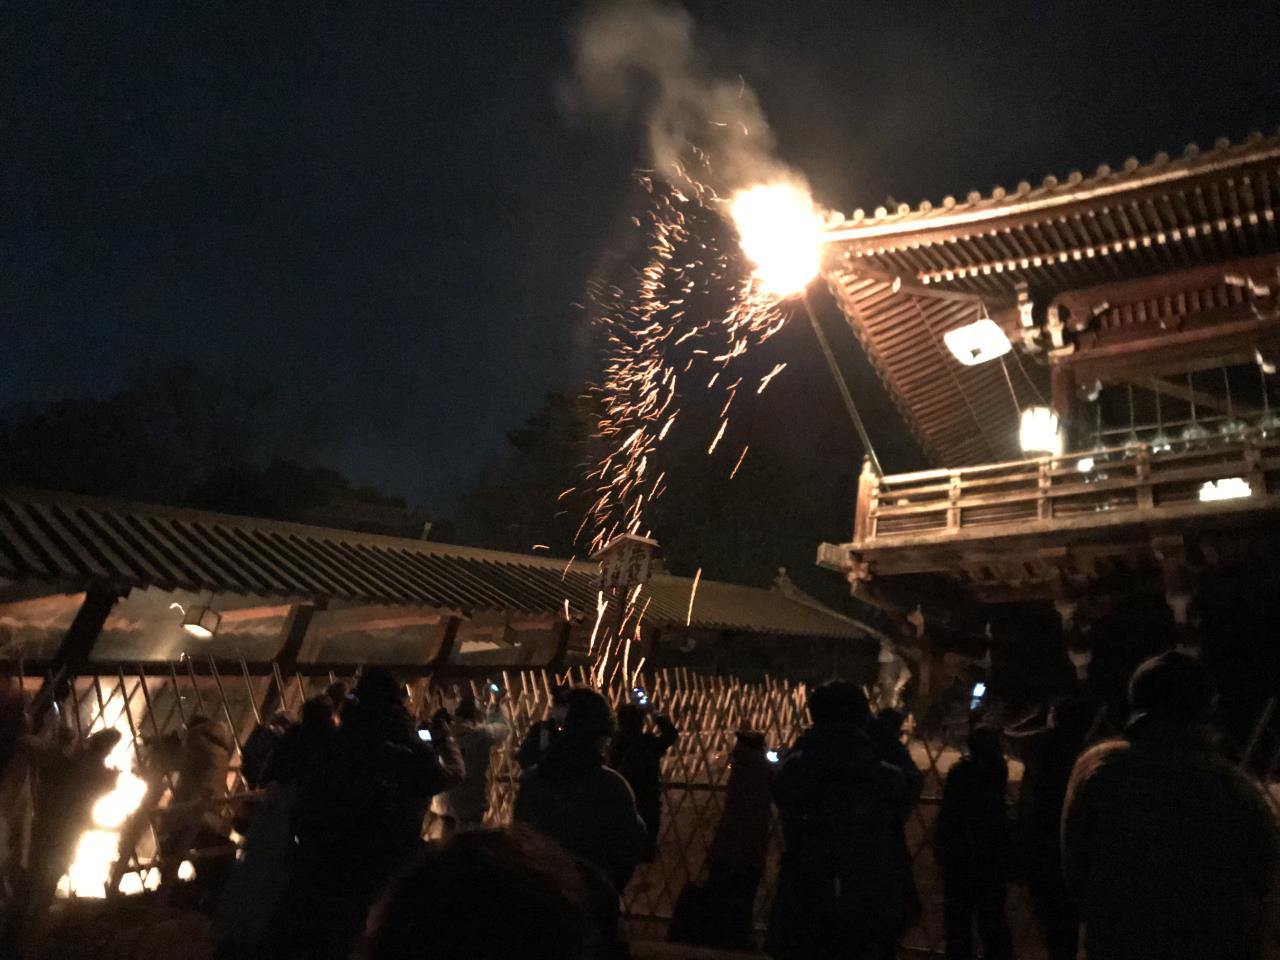 Lighting Up the Night Sky at the Ancient Shuni-e Ceremony